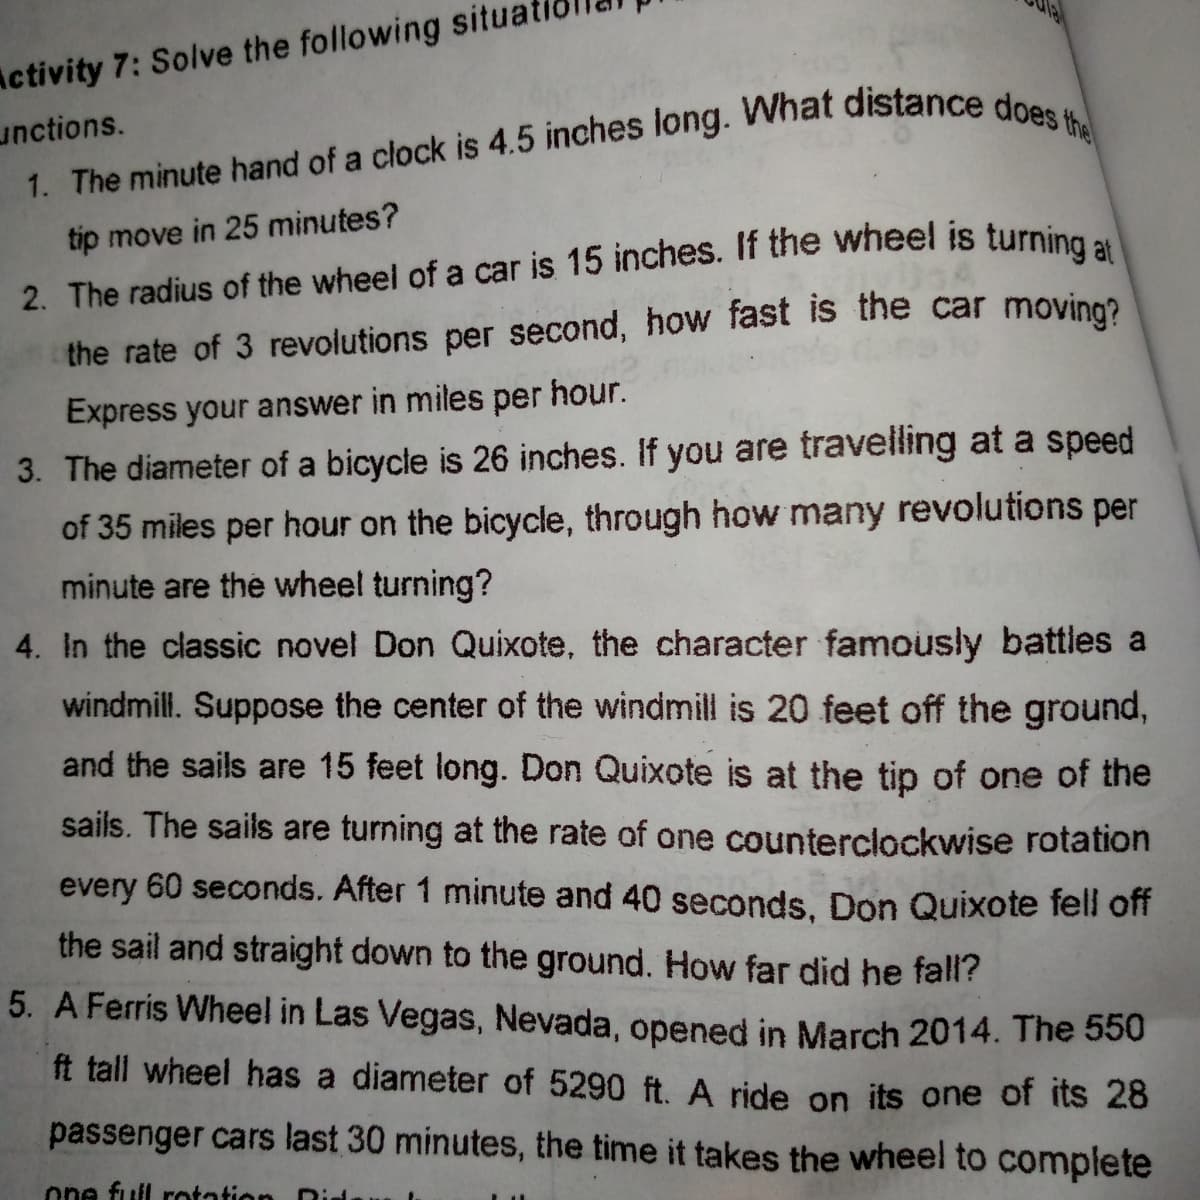 Activity 7: Solve the following situa
unctions.
a
tip move in 25 minutes?
2. The radius of the wheel of a car is 15 inches. If the wheel is turning
the rate of 3 revolutions per second, how fast is the car moving?
Express your answer in miles per hour.
3. The diameter of a bicycle is 26 inches. If you are travelling at a speed
of 35 miles per hour on the bicycle, through how many revolutions per
minute are the wheel turning?
4. In the classic novel Don Quixote, the character famously battles a
windmill. Suppose the center of the windmill is 20 feet off the ground,
and the sails are 15 feet long. Don Quixote is at the tip of one of the
sails. The sails are turning at the rate of one counterclockwise rotation
every 60 seconds. After 1 minute and 40 seconds. Don Quixote fell off
the sail and straight down to the ground. How far did he fall?
5. A Ferris Wheel in Las Vegas, Nevada, opened in March 2014. The 550
ft tall wheel has a diameter of 5290 ft. A ride on its one of its 28
passenger cars last 30 minutes, the time it takes the wheel to complete
one full rotation
Did
